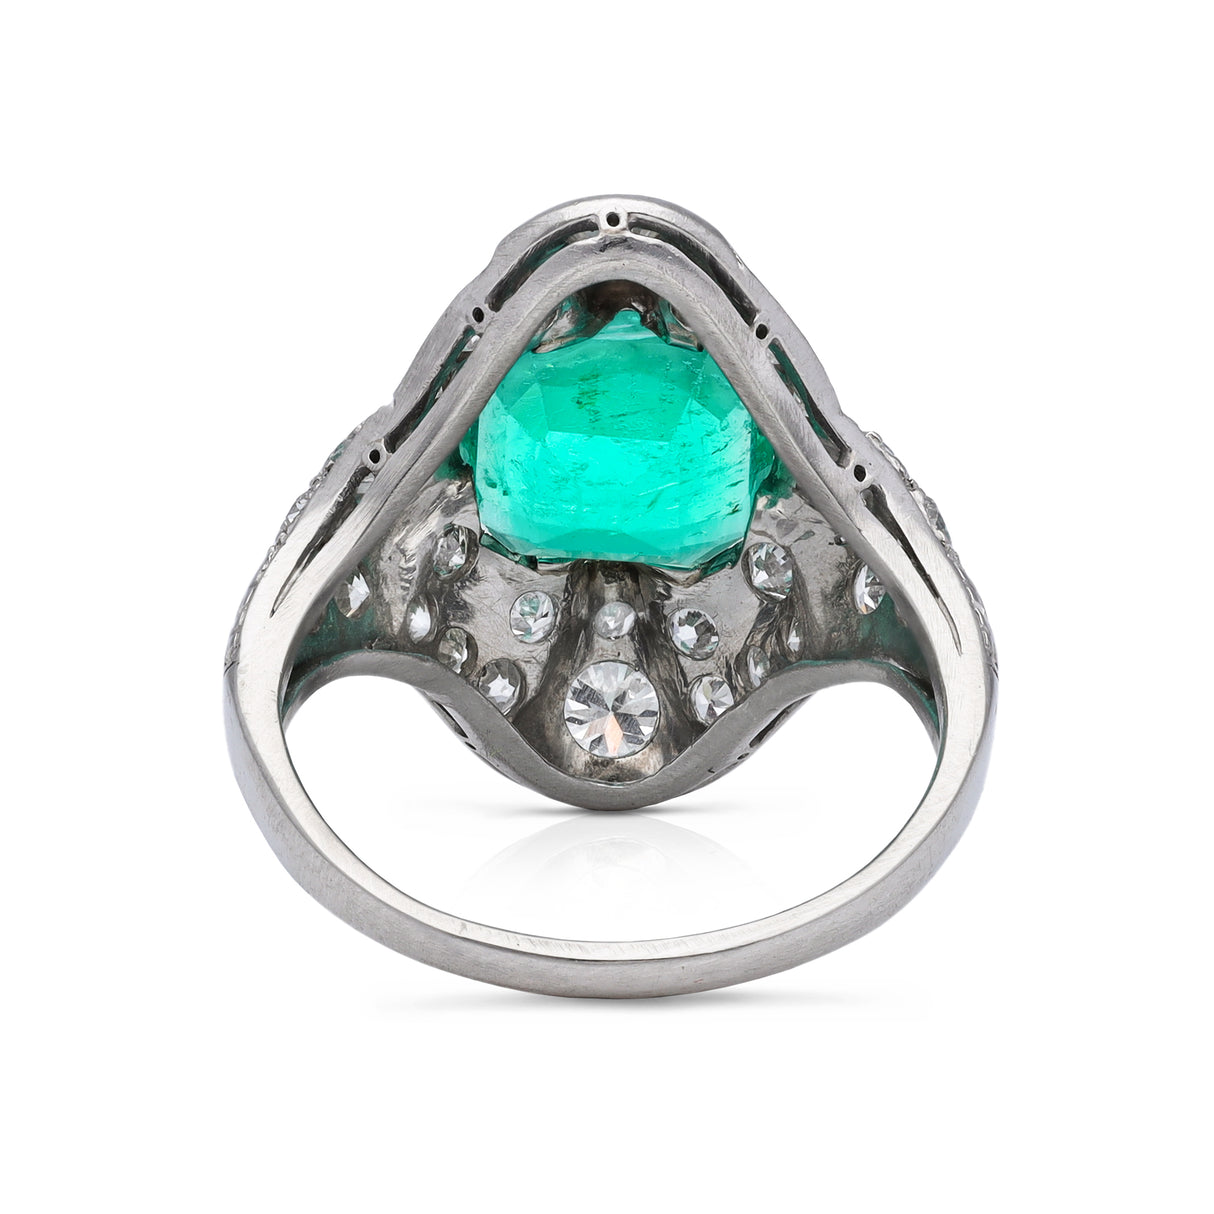 Art Deco emerald and diamond ring, rear view. 